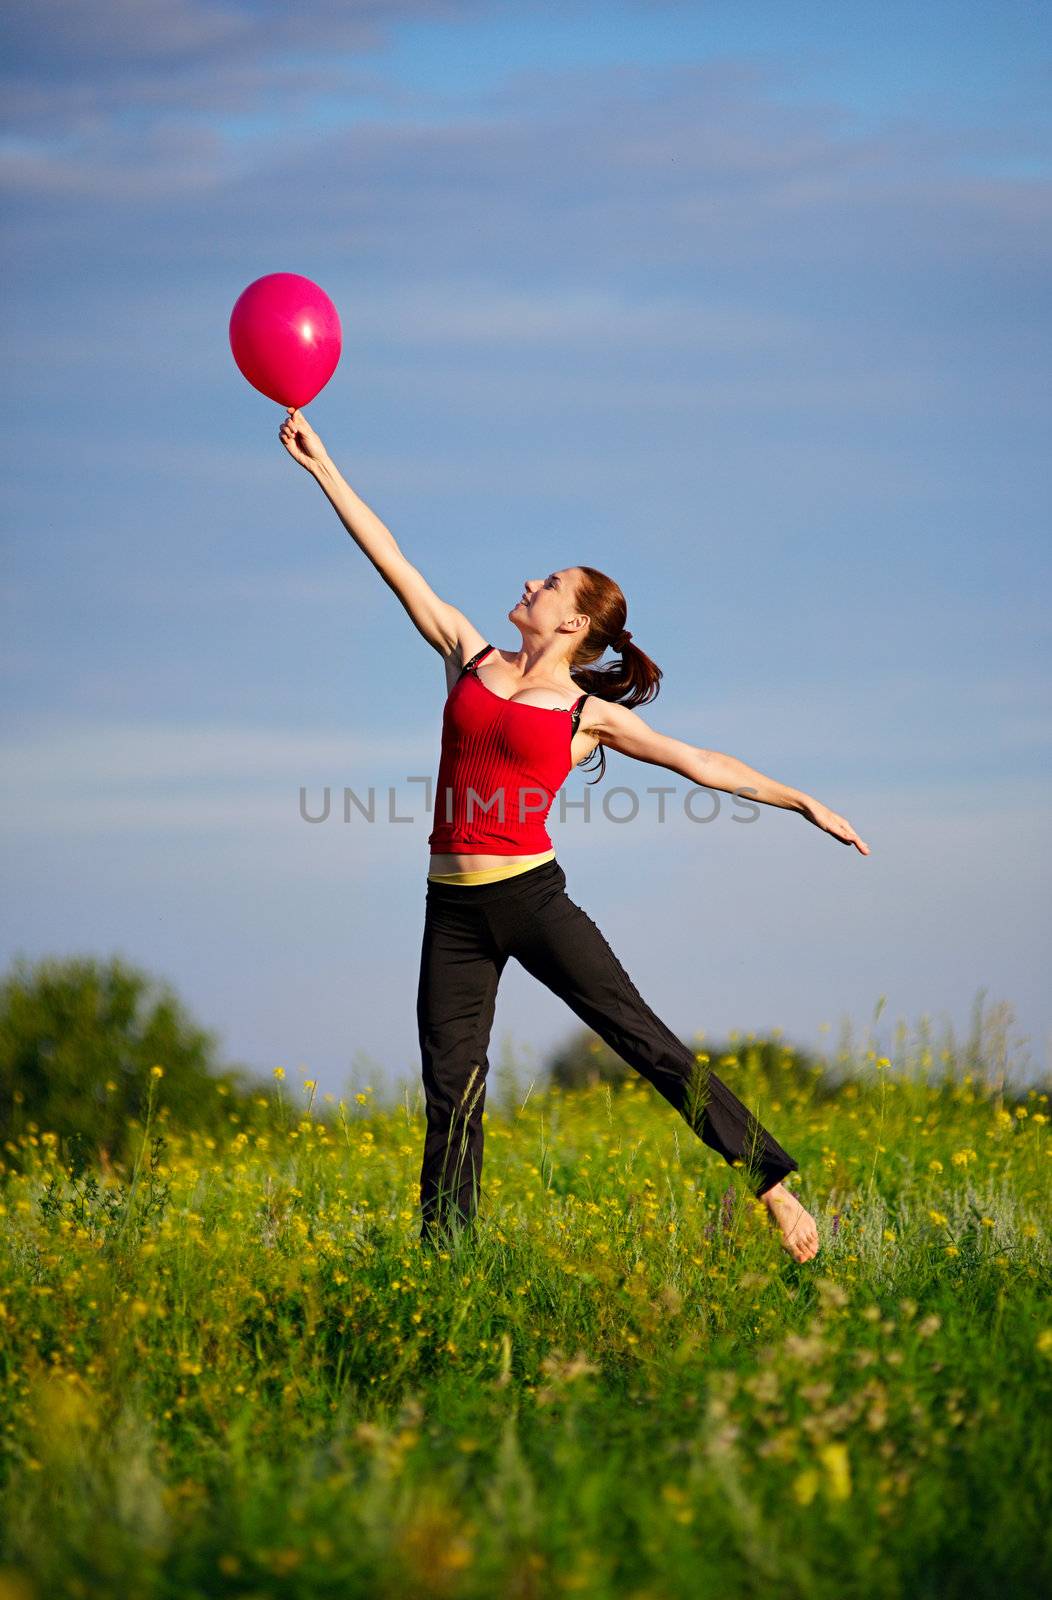 Woman jumping with a red balloon by kirs-ua